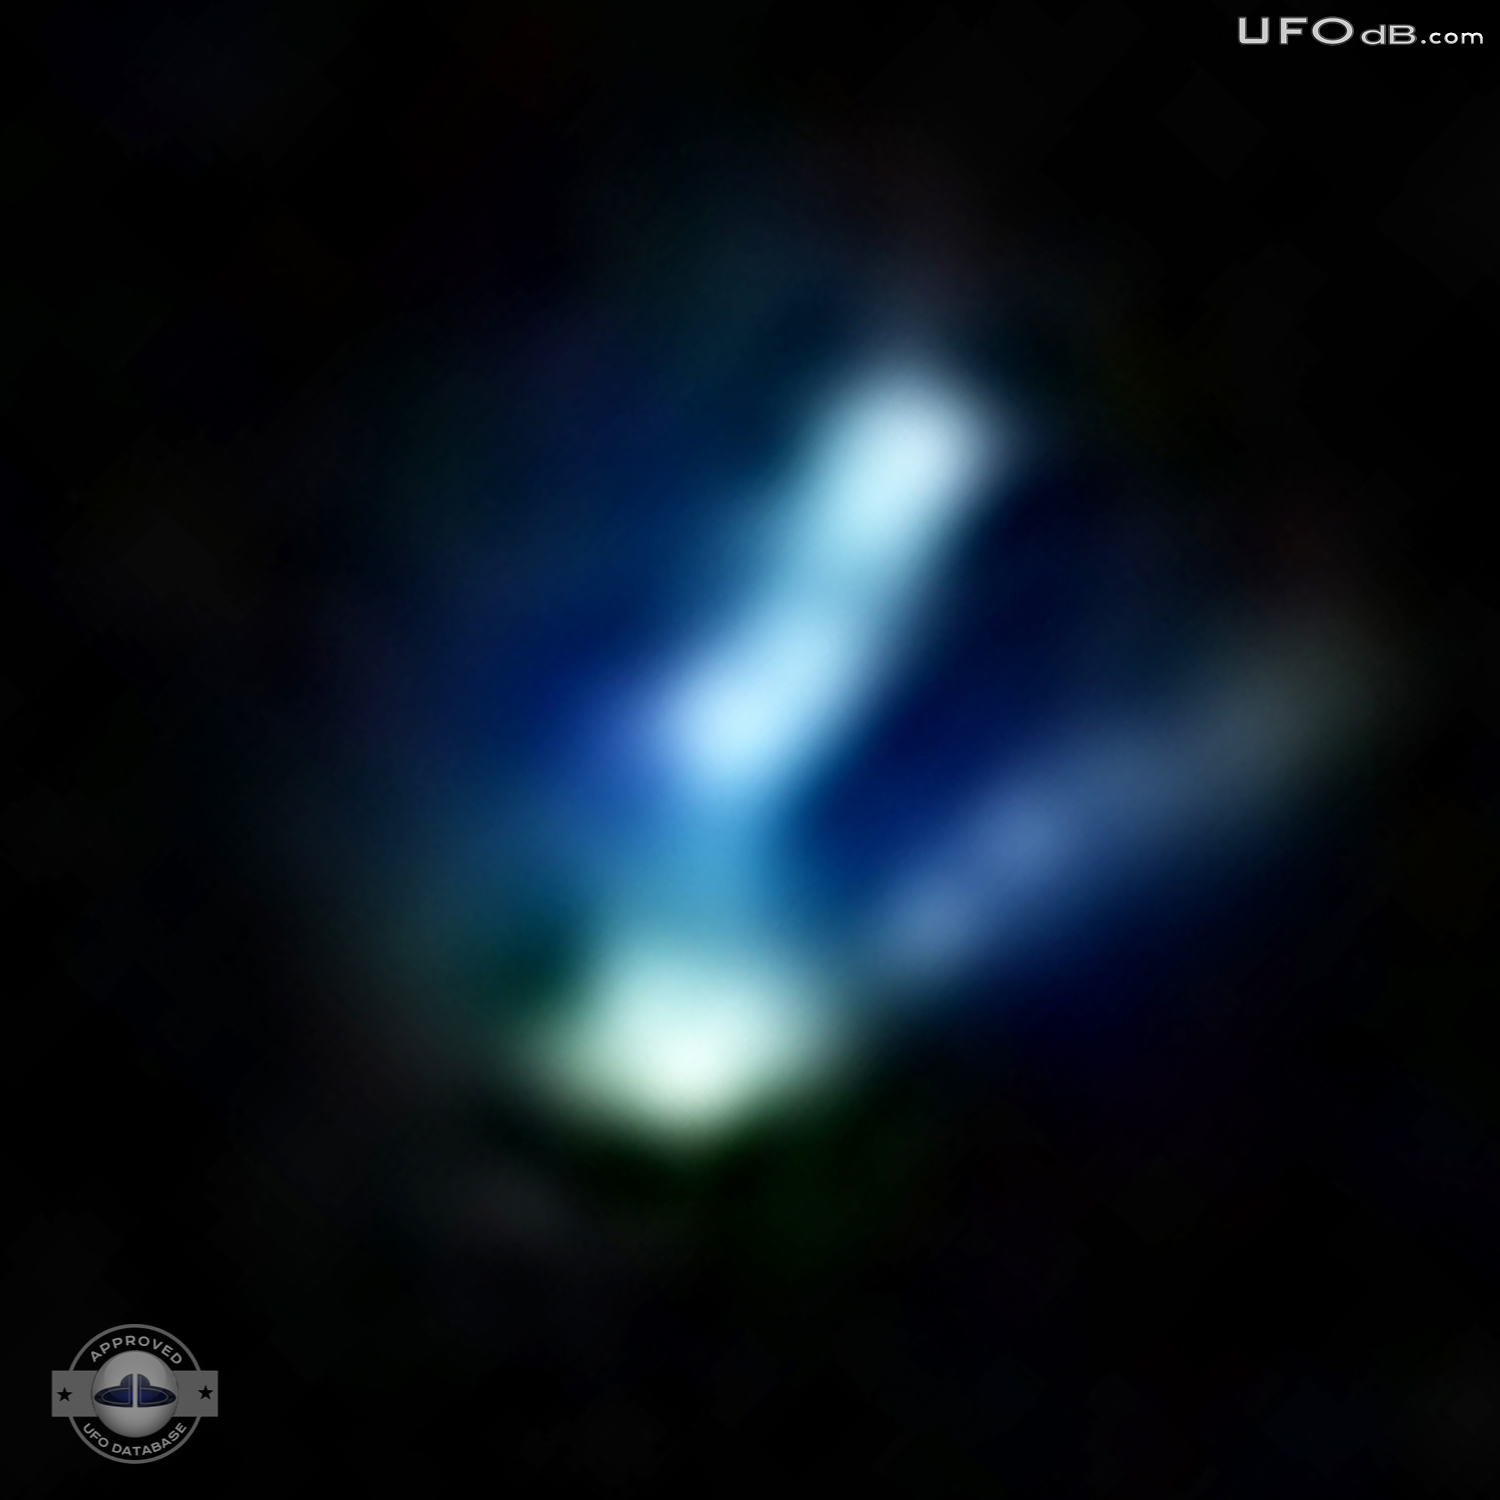 Alien Space Station taken on picture | Alberta Canada | January 2011 UFO Picture #270-5